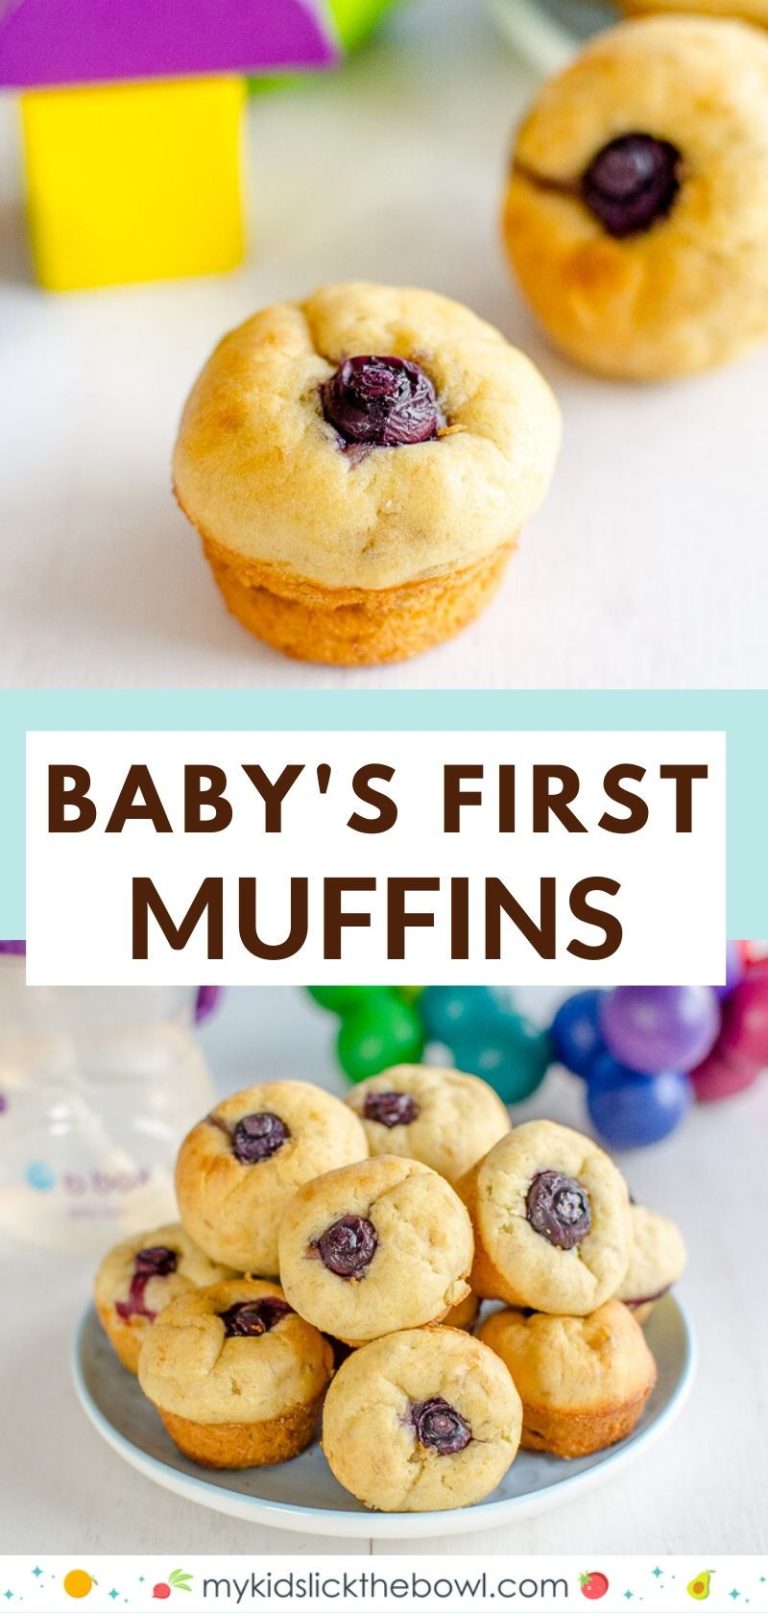 Banana Muffins Healthy For Babies